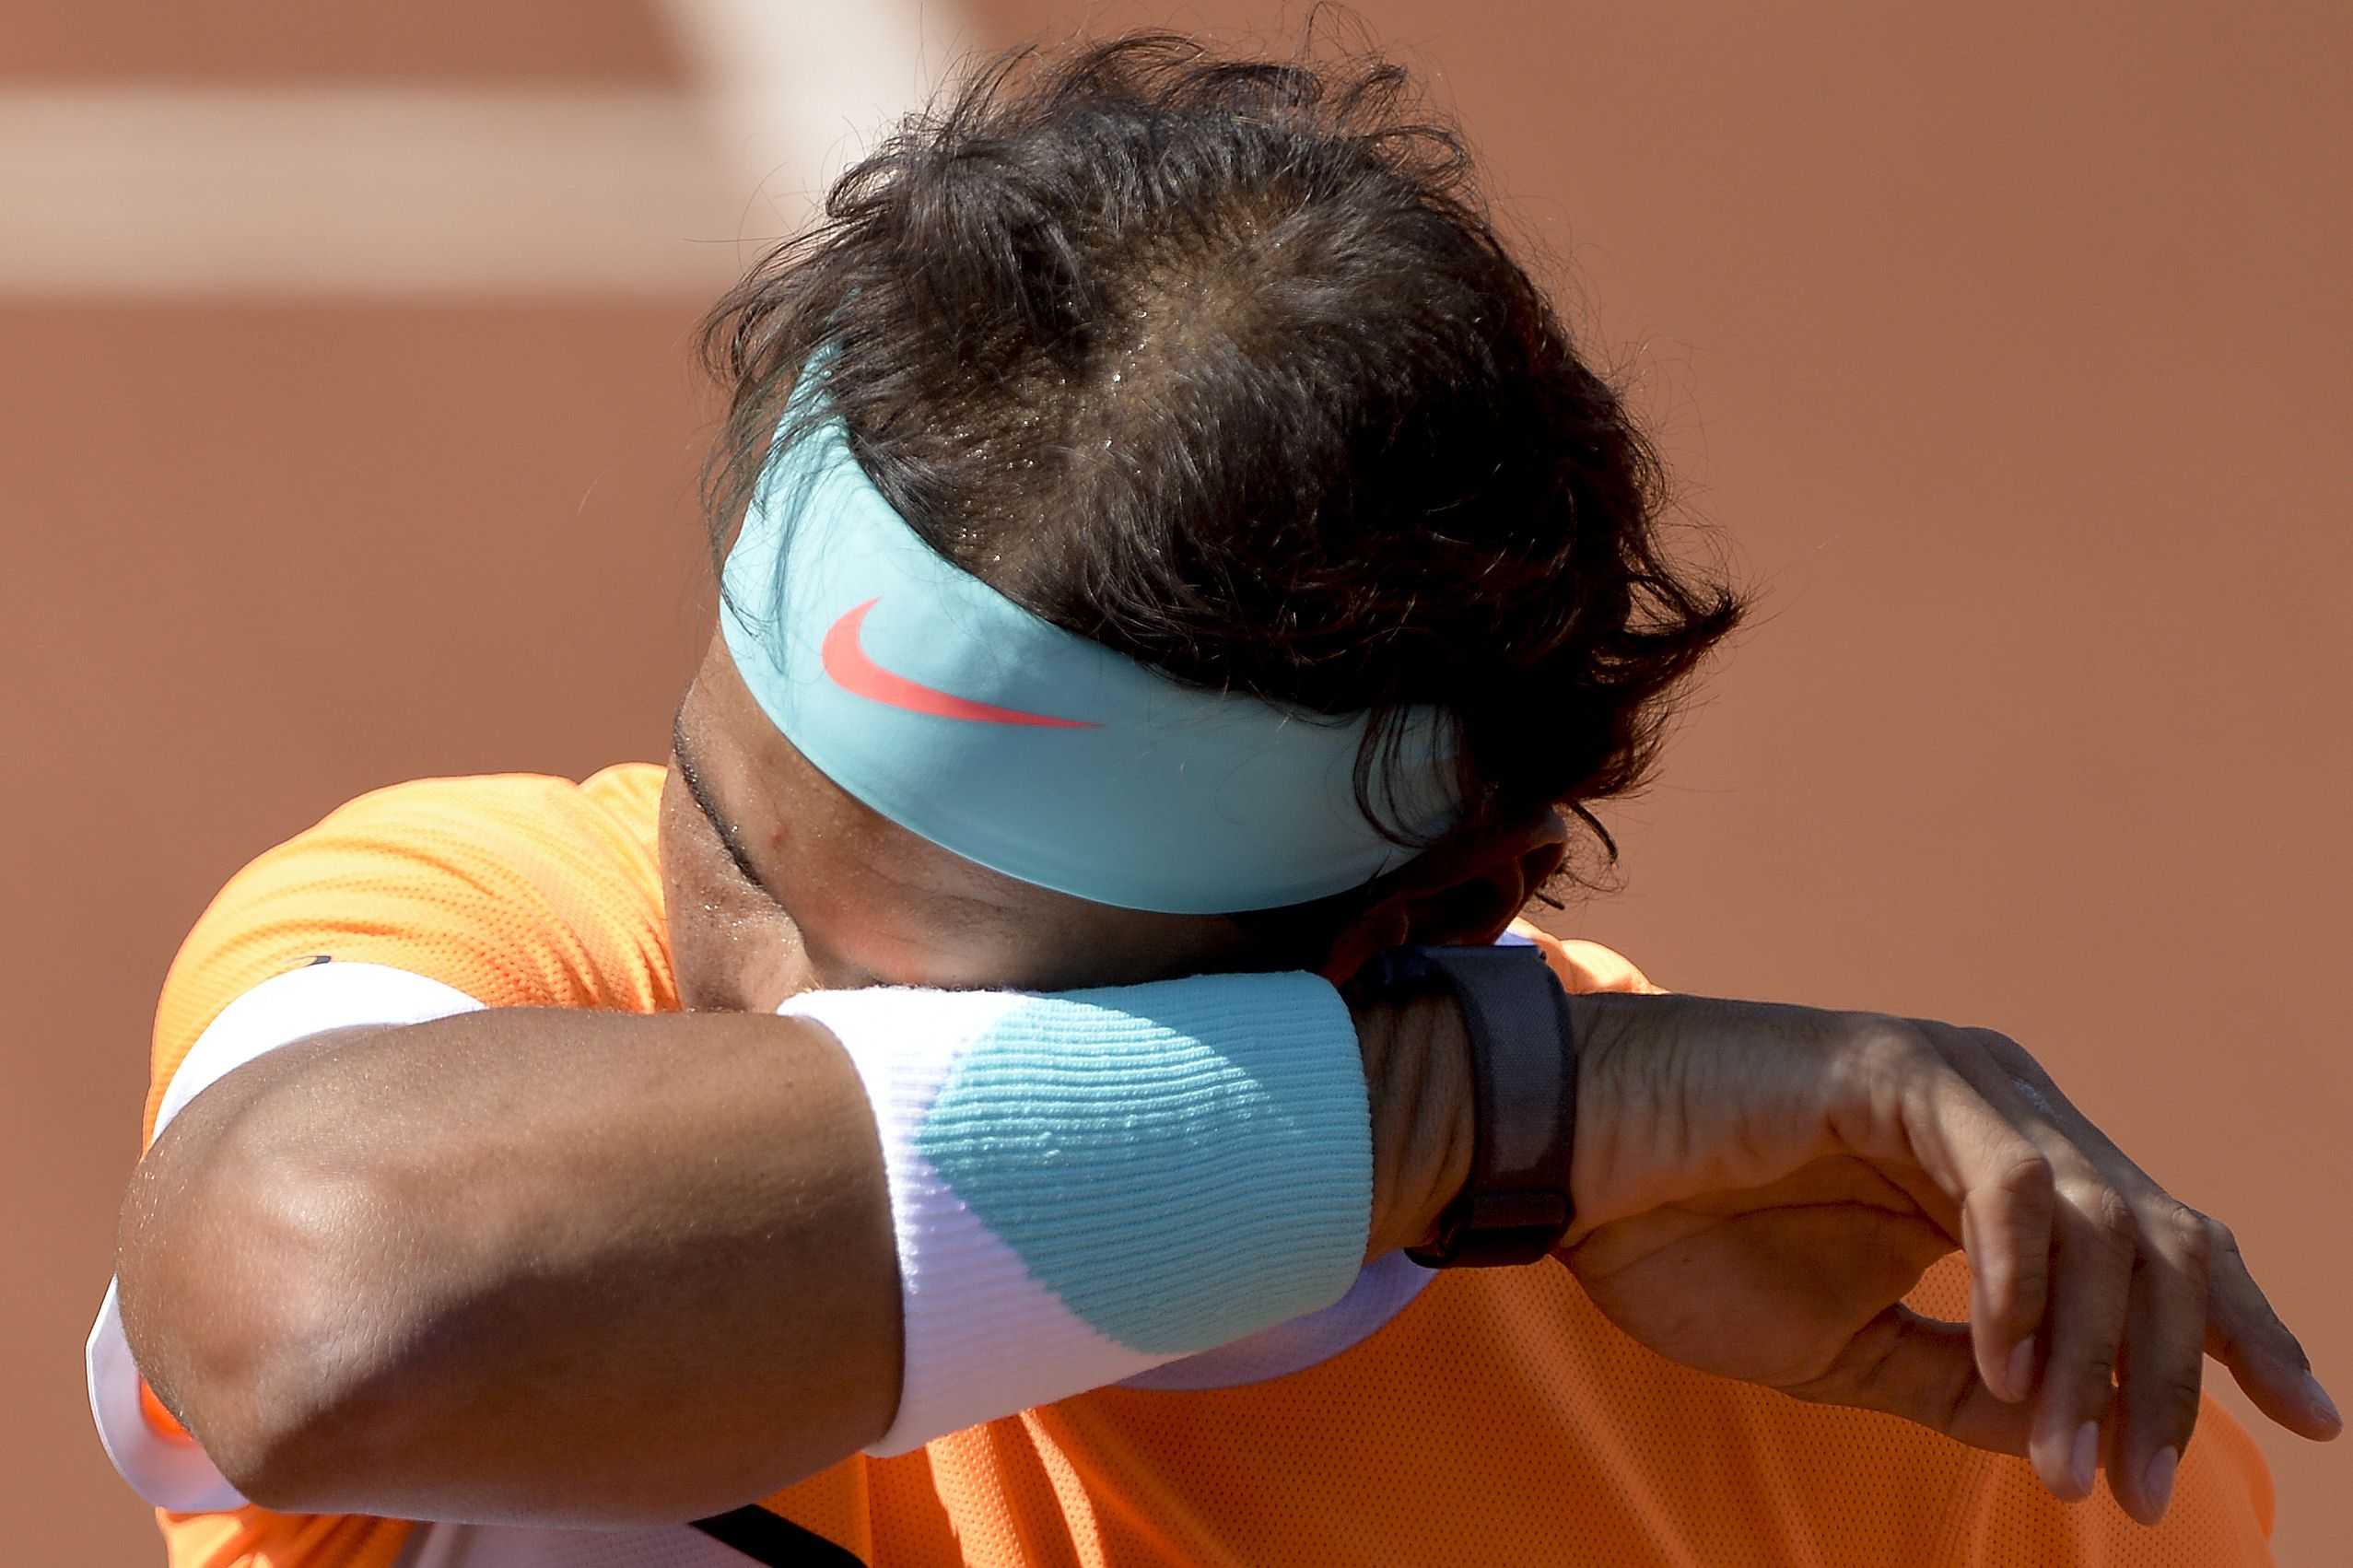 Spaniard Rafael Nadal wipes his head after a match against Italian tennis player Fabio Fognini at the "Conde de Godo" tennis tournament in Barcelona. Photos: AFP 